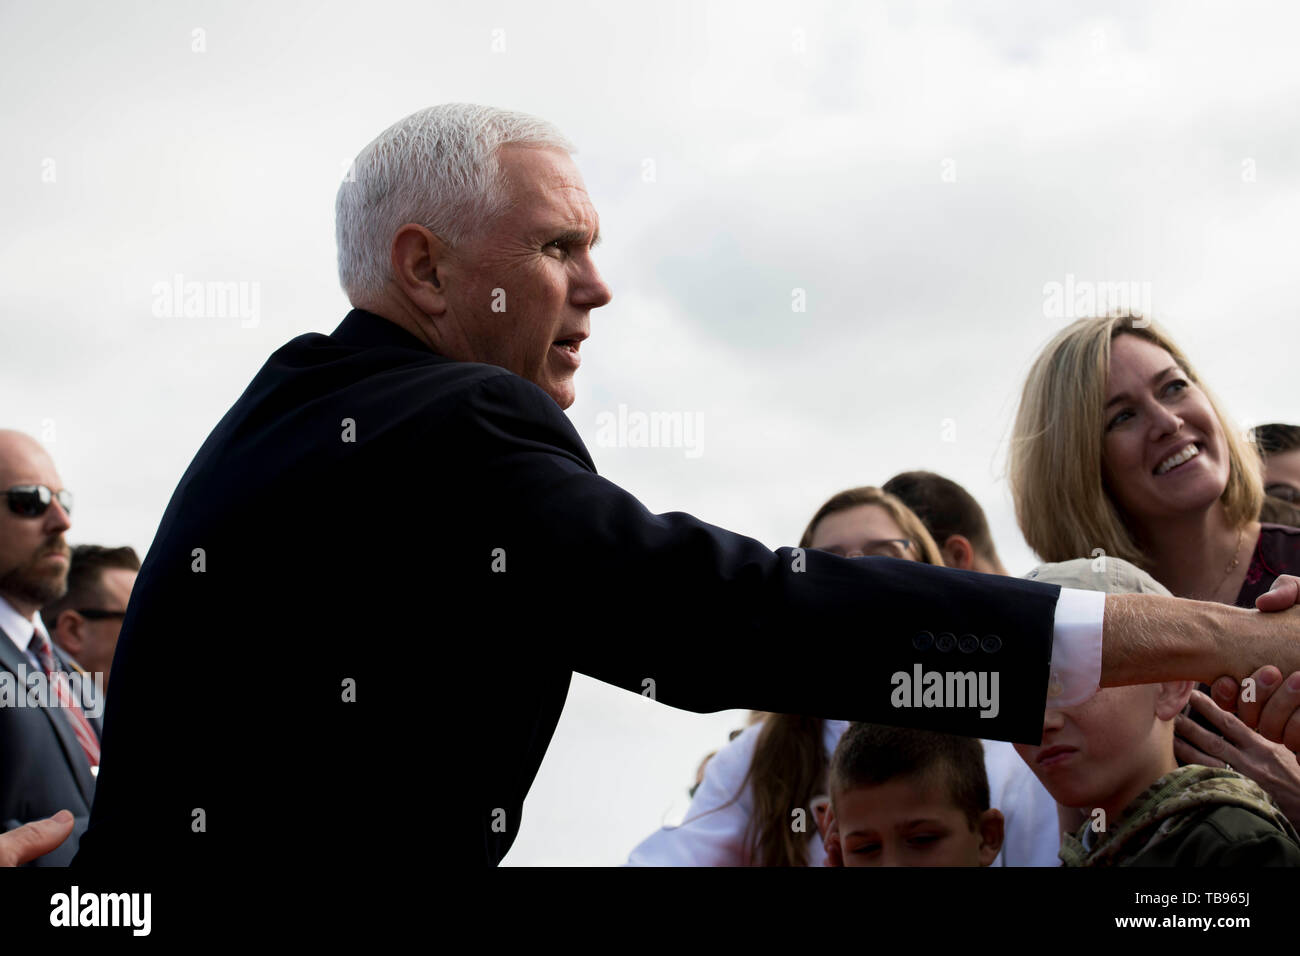 Vice President Mike Pence visits Stewart Air National Guard Base before attending the West Point Graduation Ceremony May 25th, 2019. Pence embraced a crowd before his keynote speech at the 2019 West Point Graduation. Stock Photo